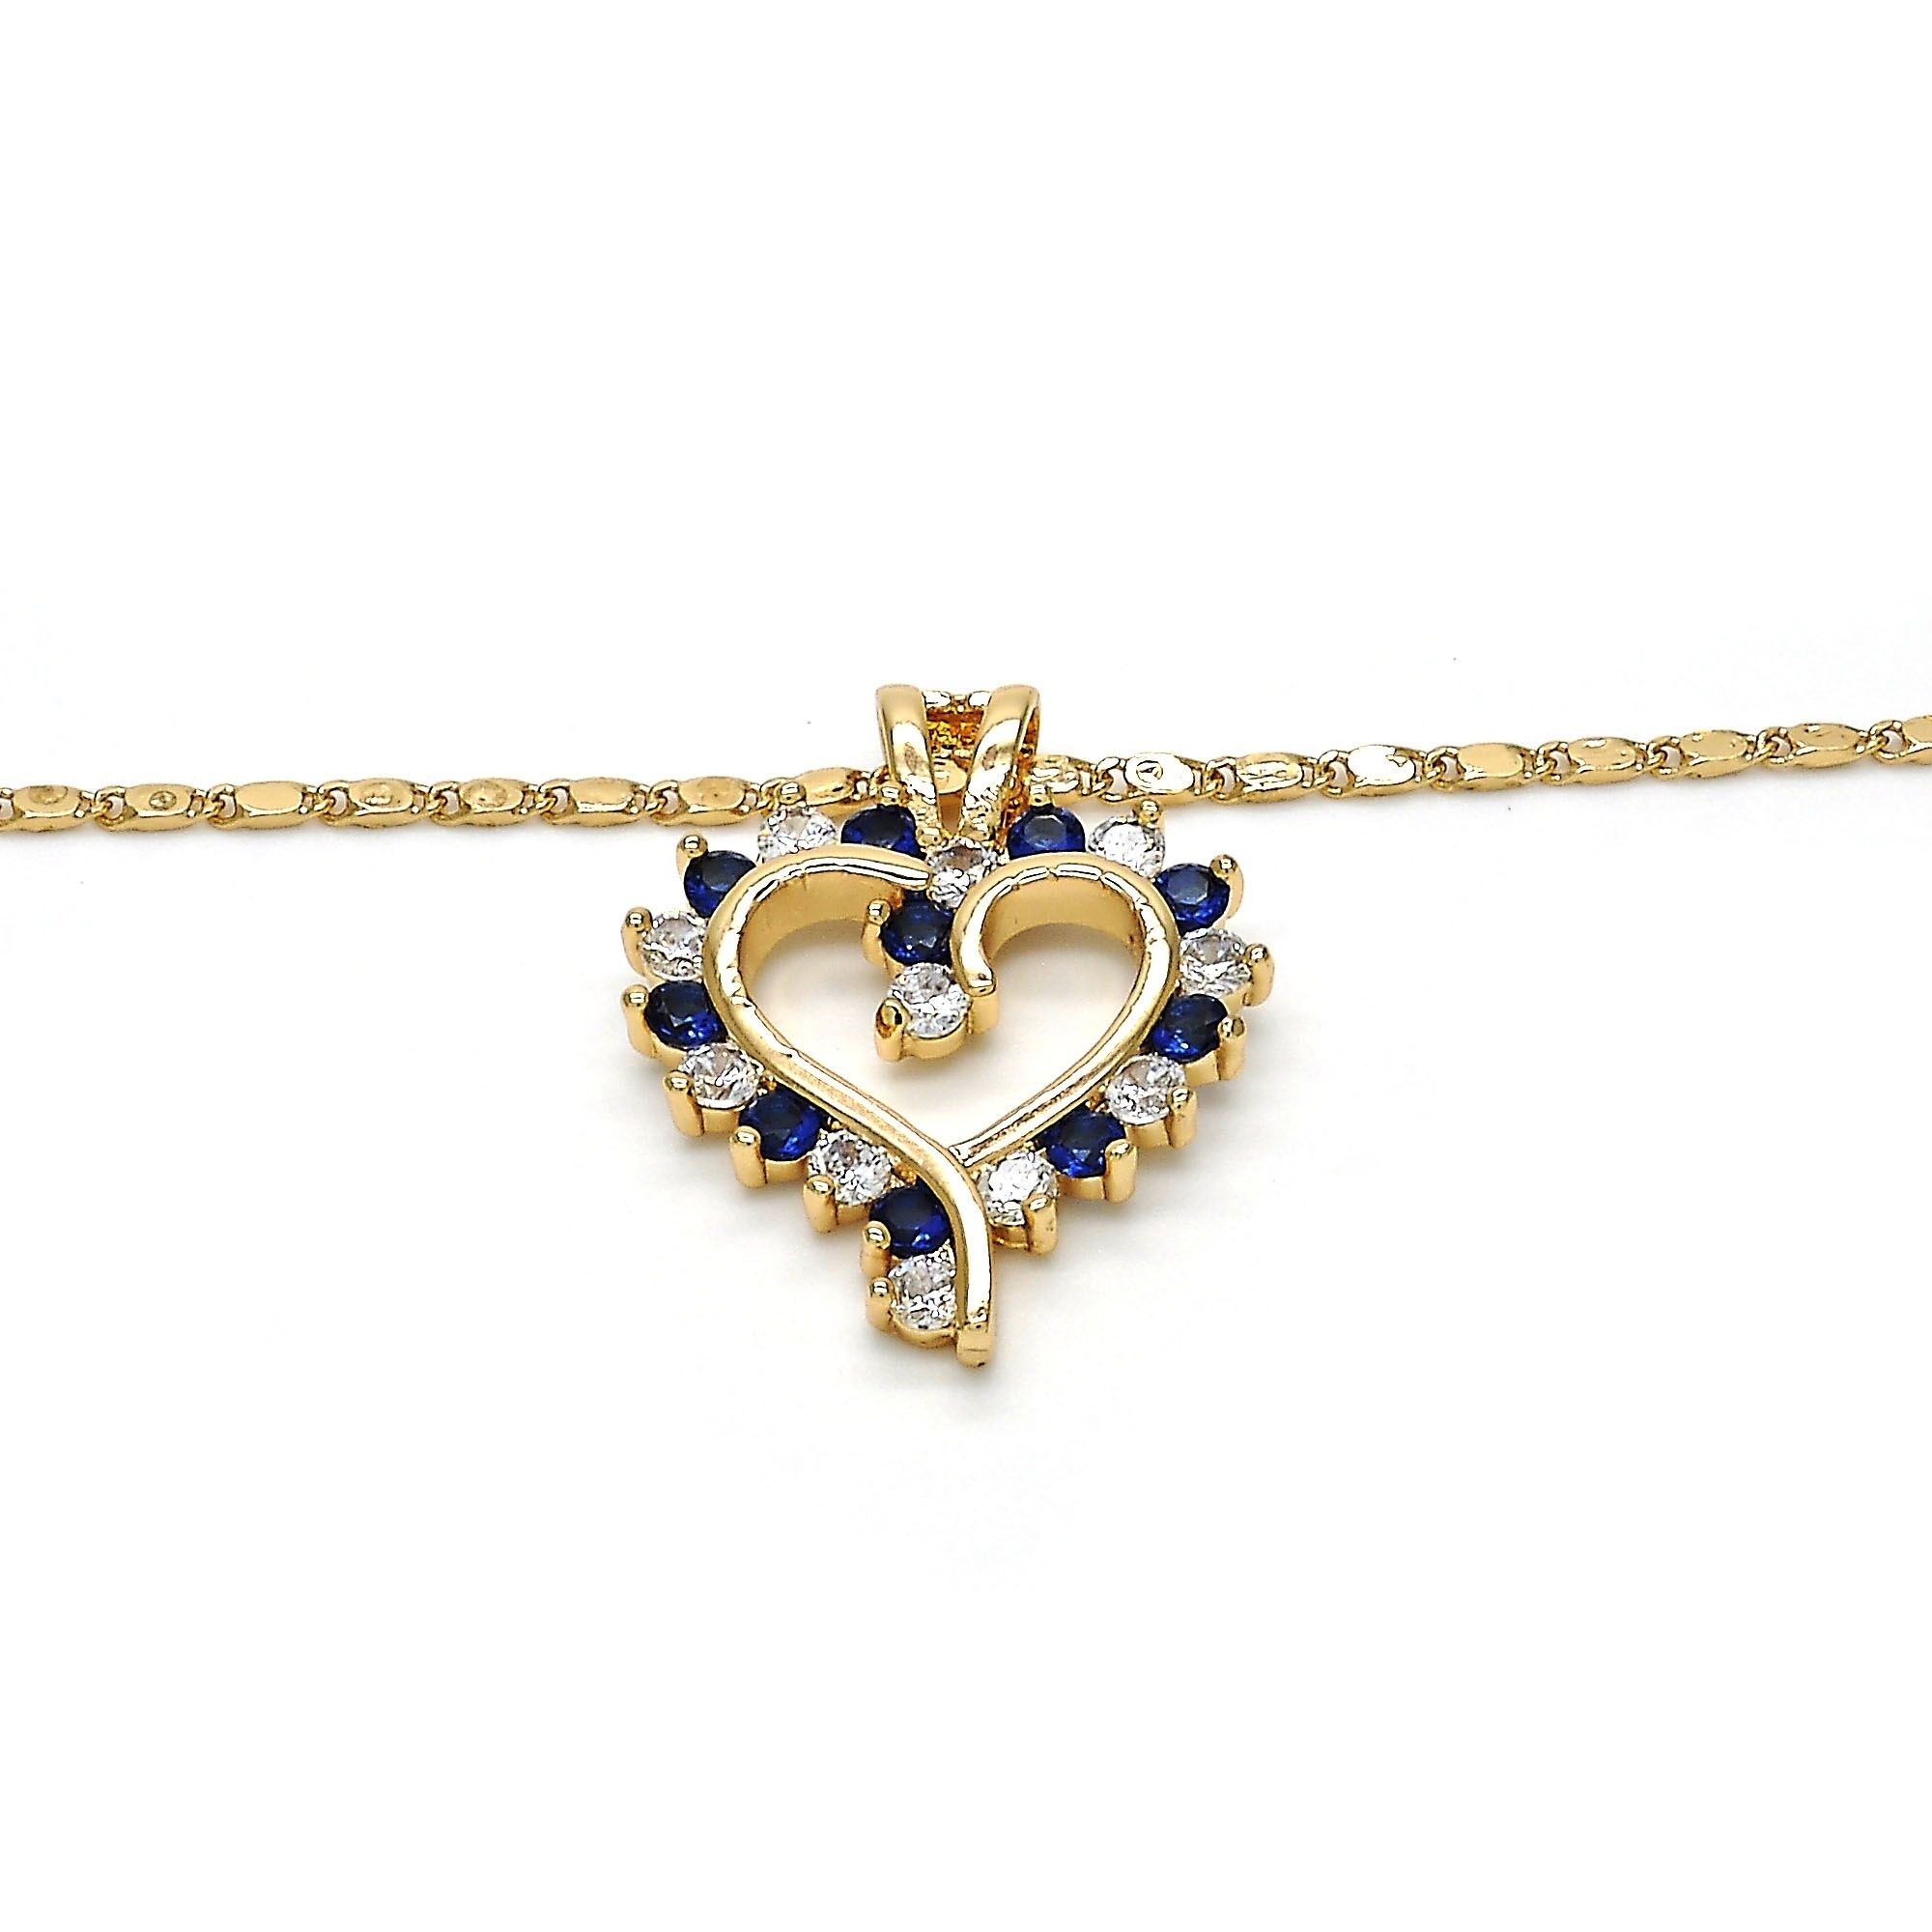 18K Gold Filled High Polish Finsh Fancy Necklace, Heart Design, With Micro Pava Setting